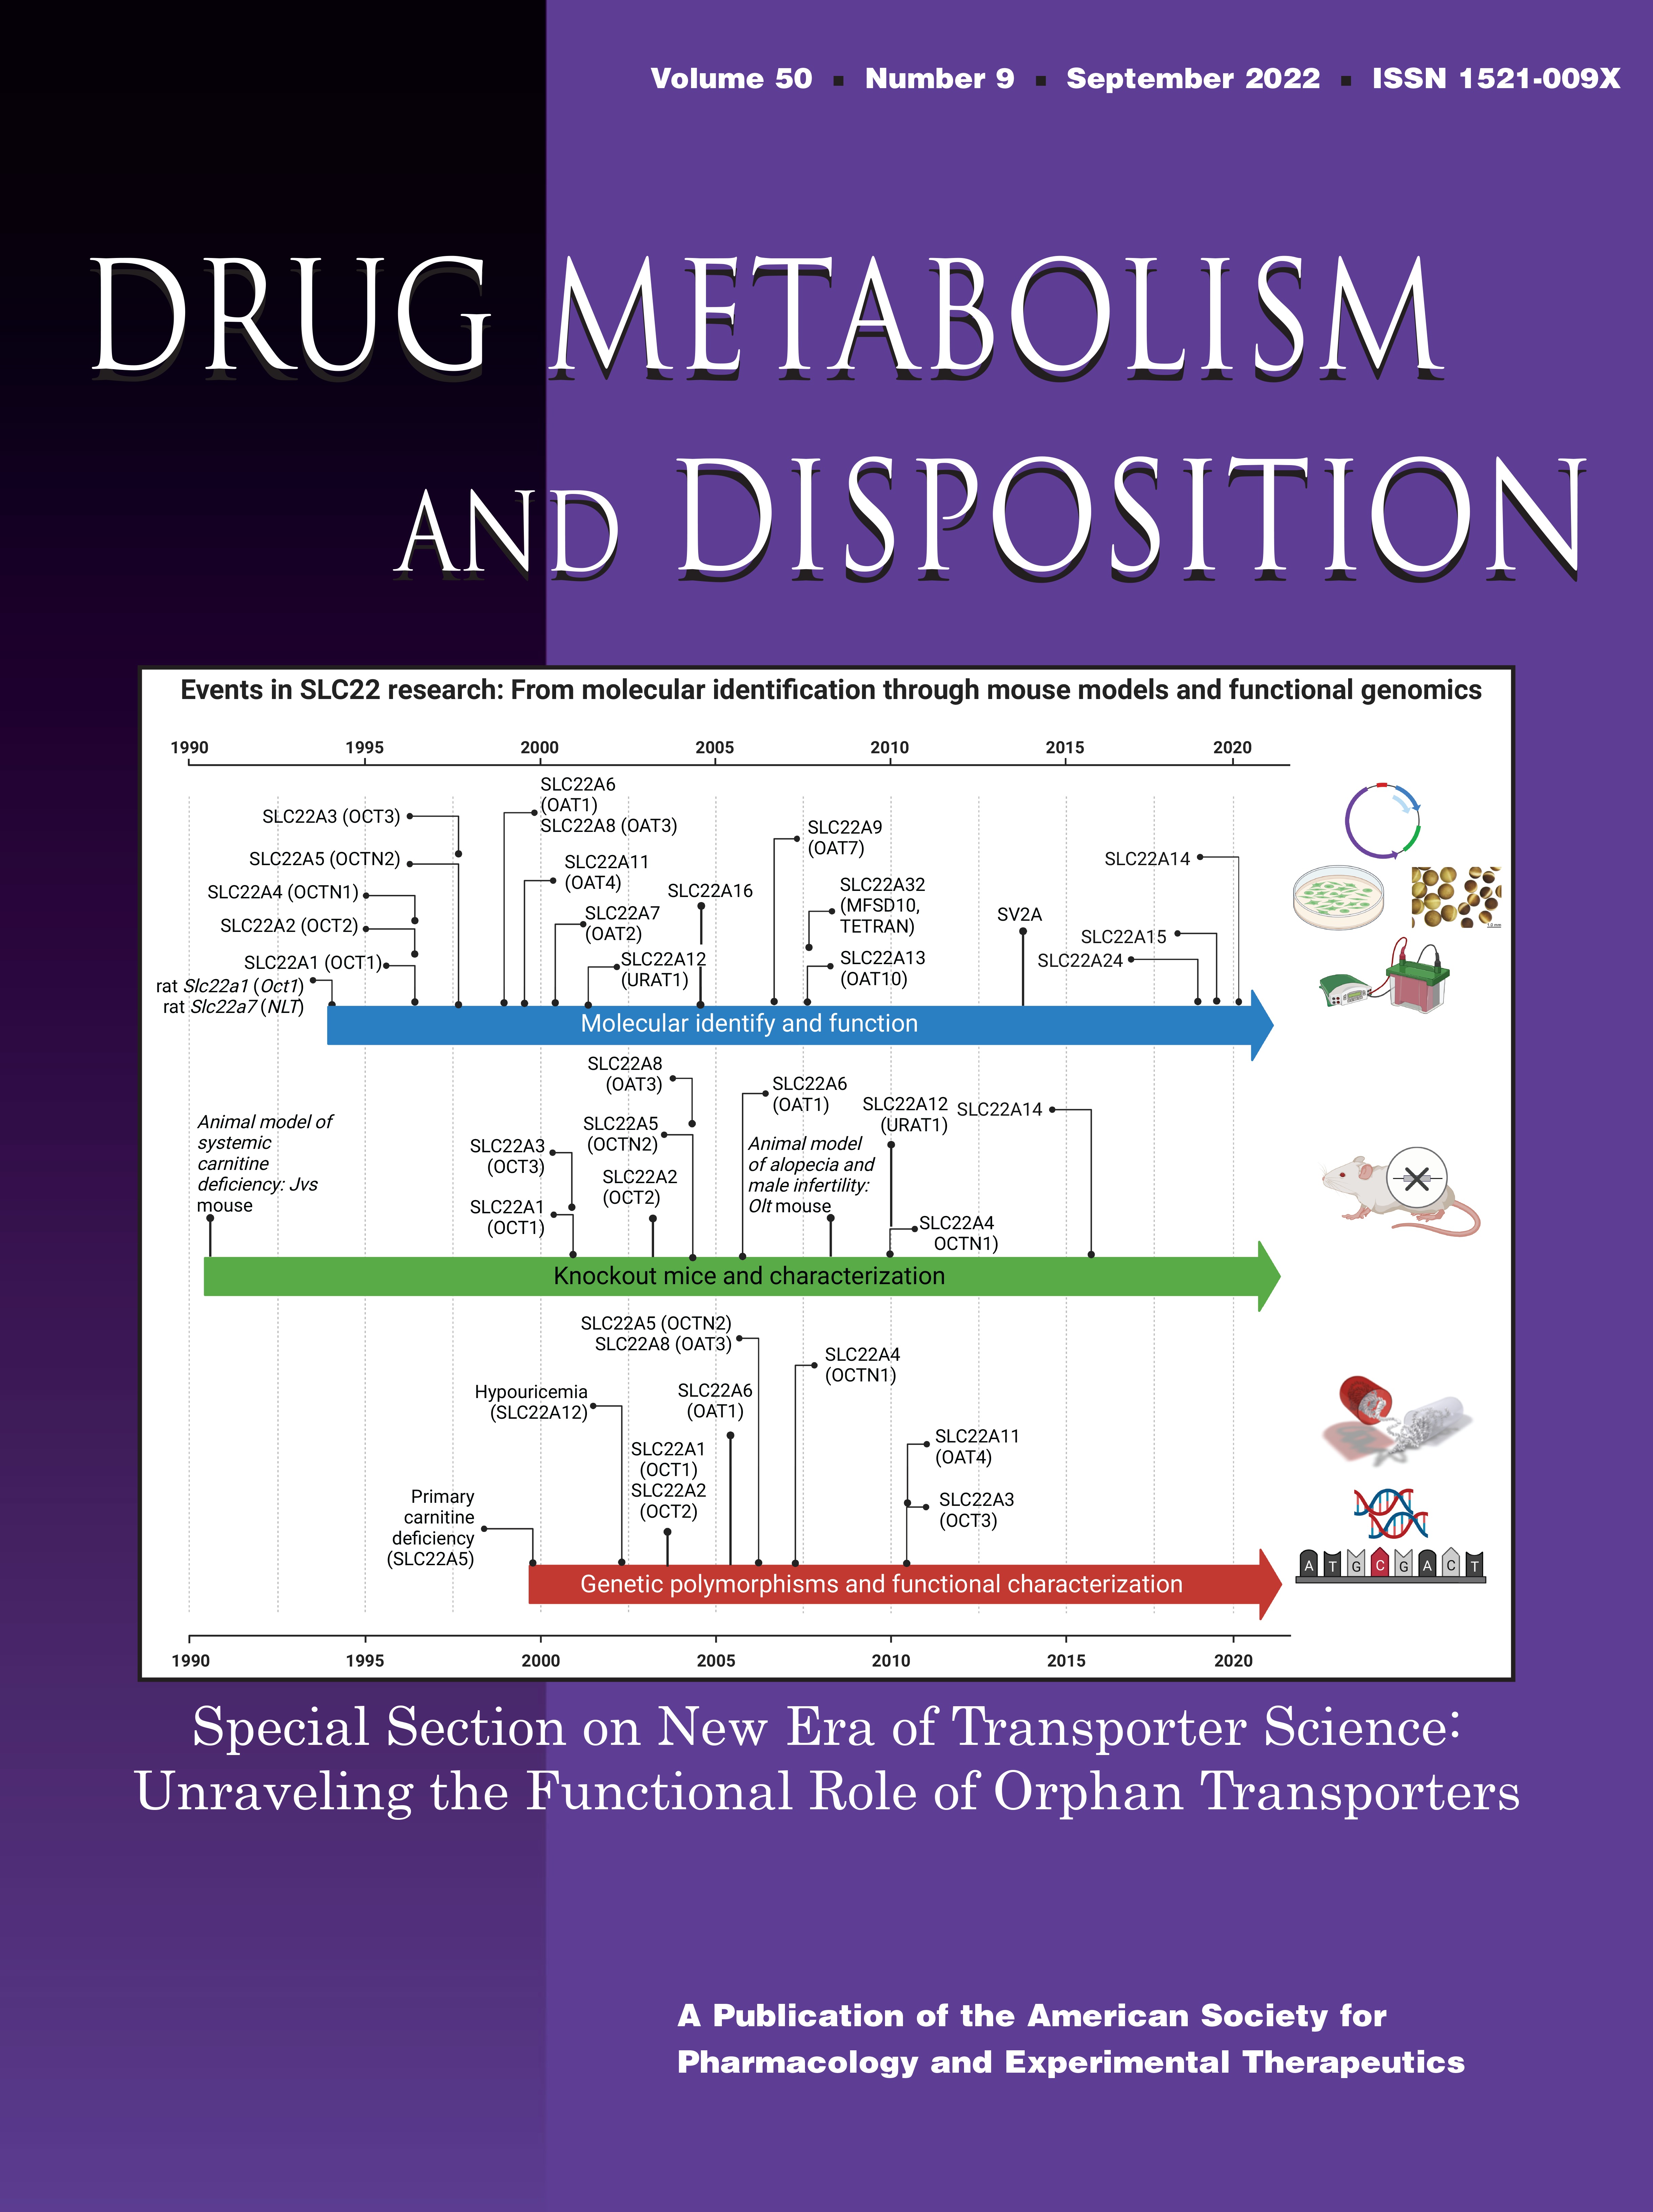 Clinical Applications and the Roles of Transporters in Disposition, Tumor Targeting, and Tissue Toxicity of meta-Iodobenzylguanidine [Special Section on New Era of Transporter Science: Unraveling the Functional Role of Orphan Transporters]